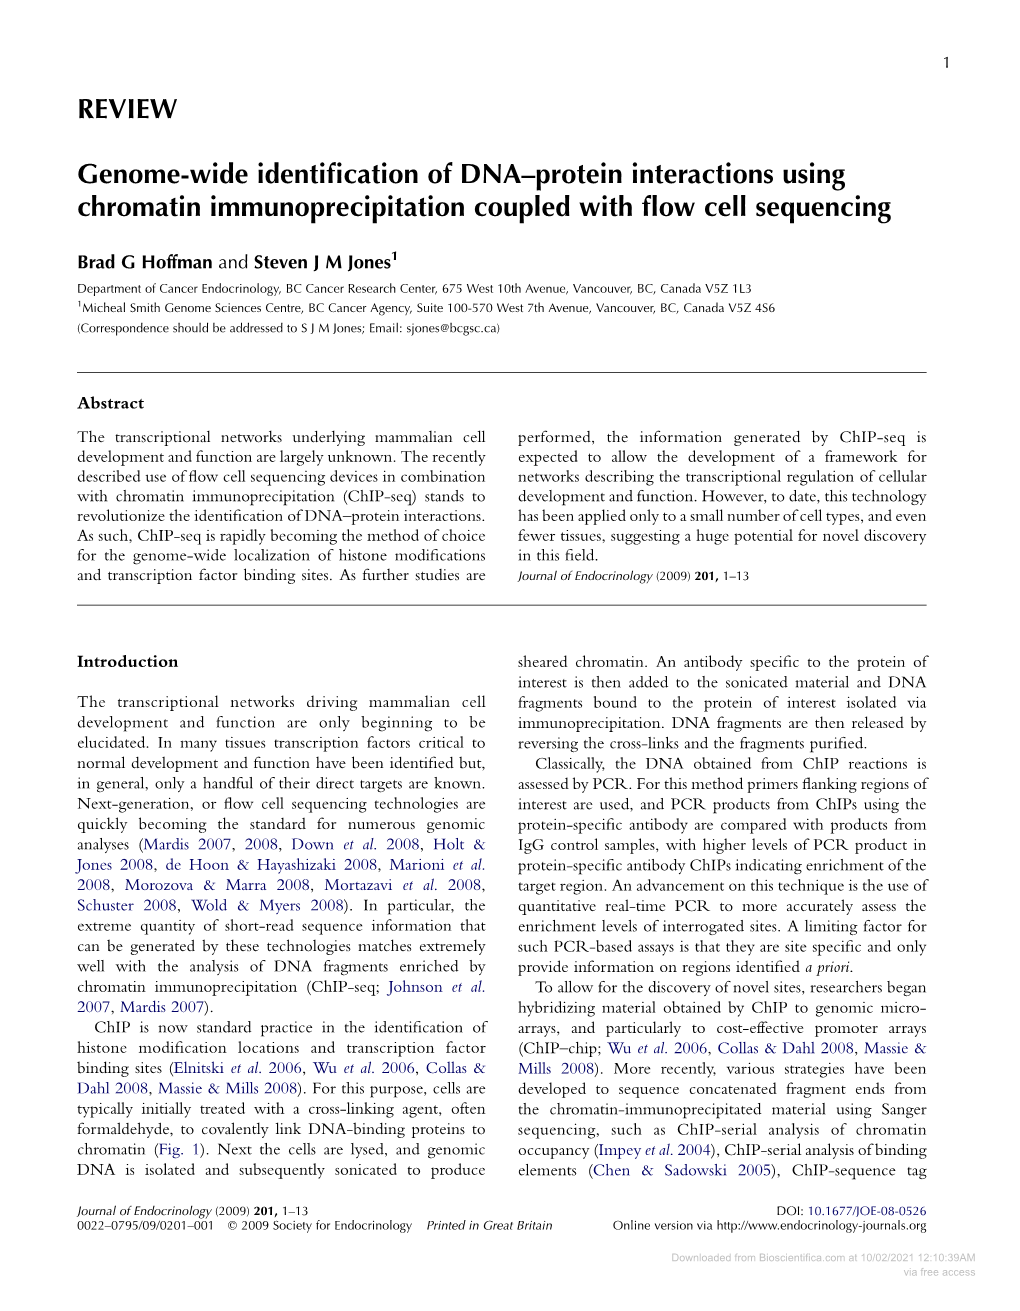 REVIEW Genome-Wide Identification of DNA–Protein Interactions Using Chromatin Immunoprecipitation Coupled with Flow Cell Seque